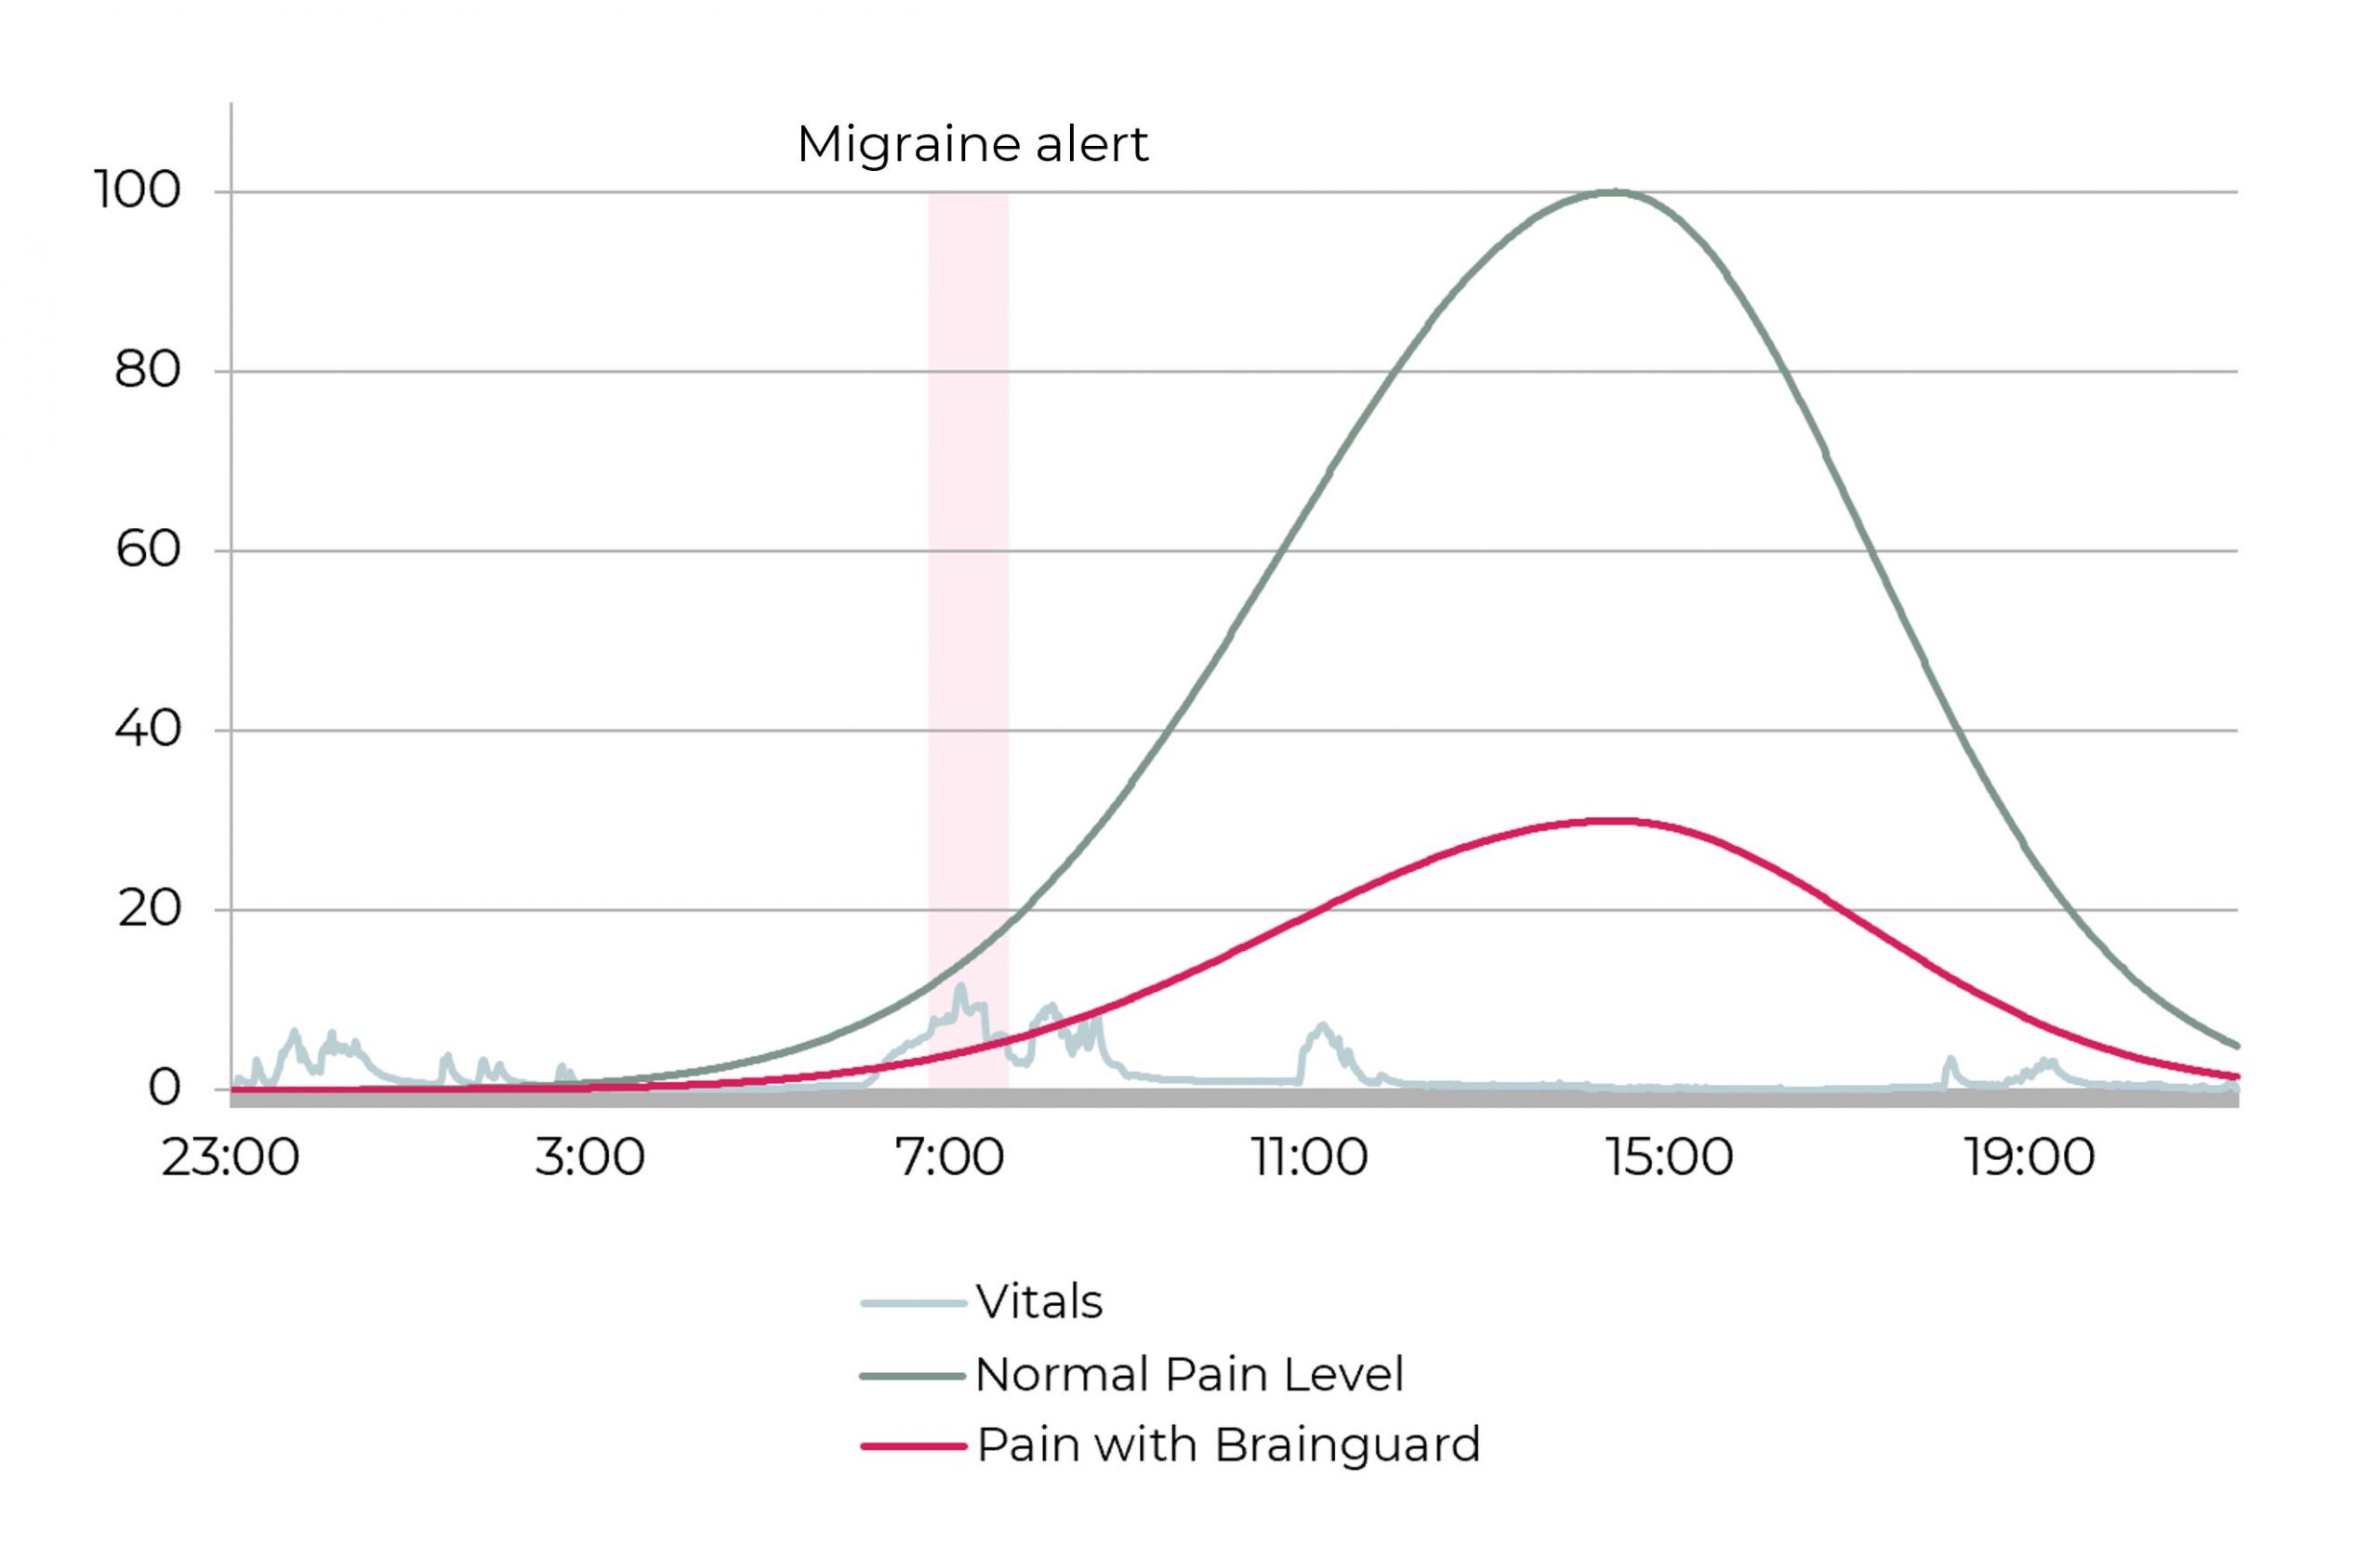 Graphic comparing the pain level with and without Brainguard.